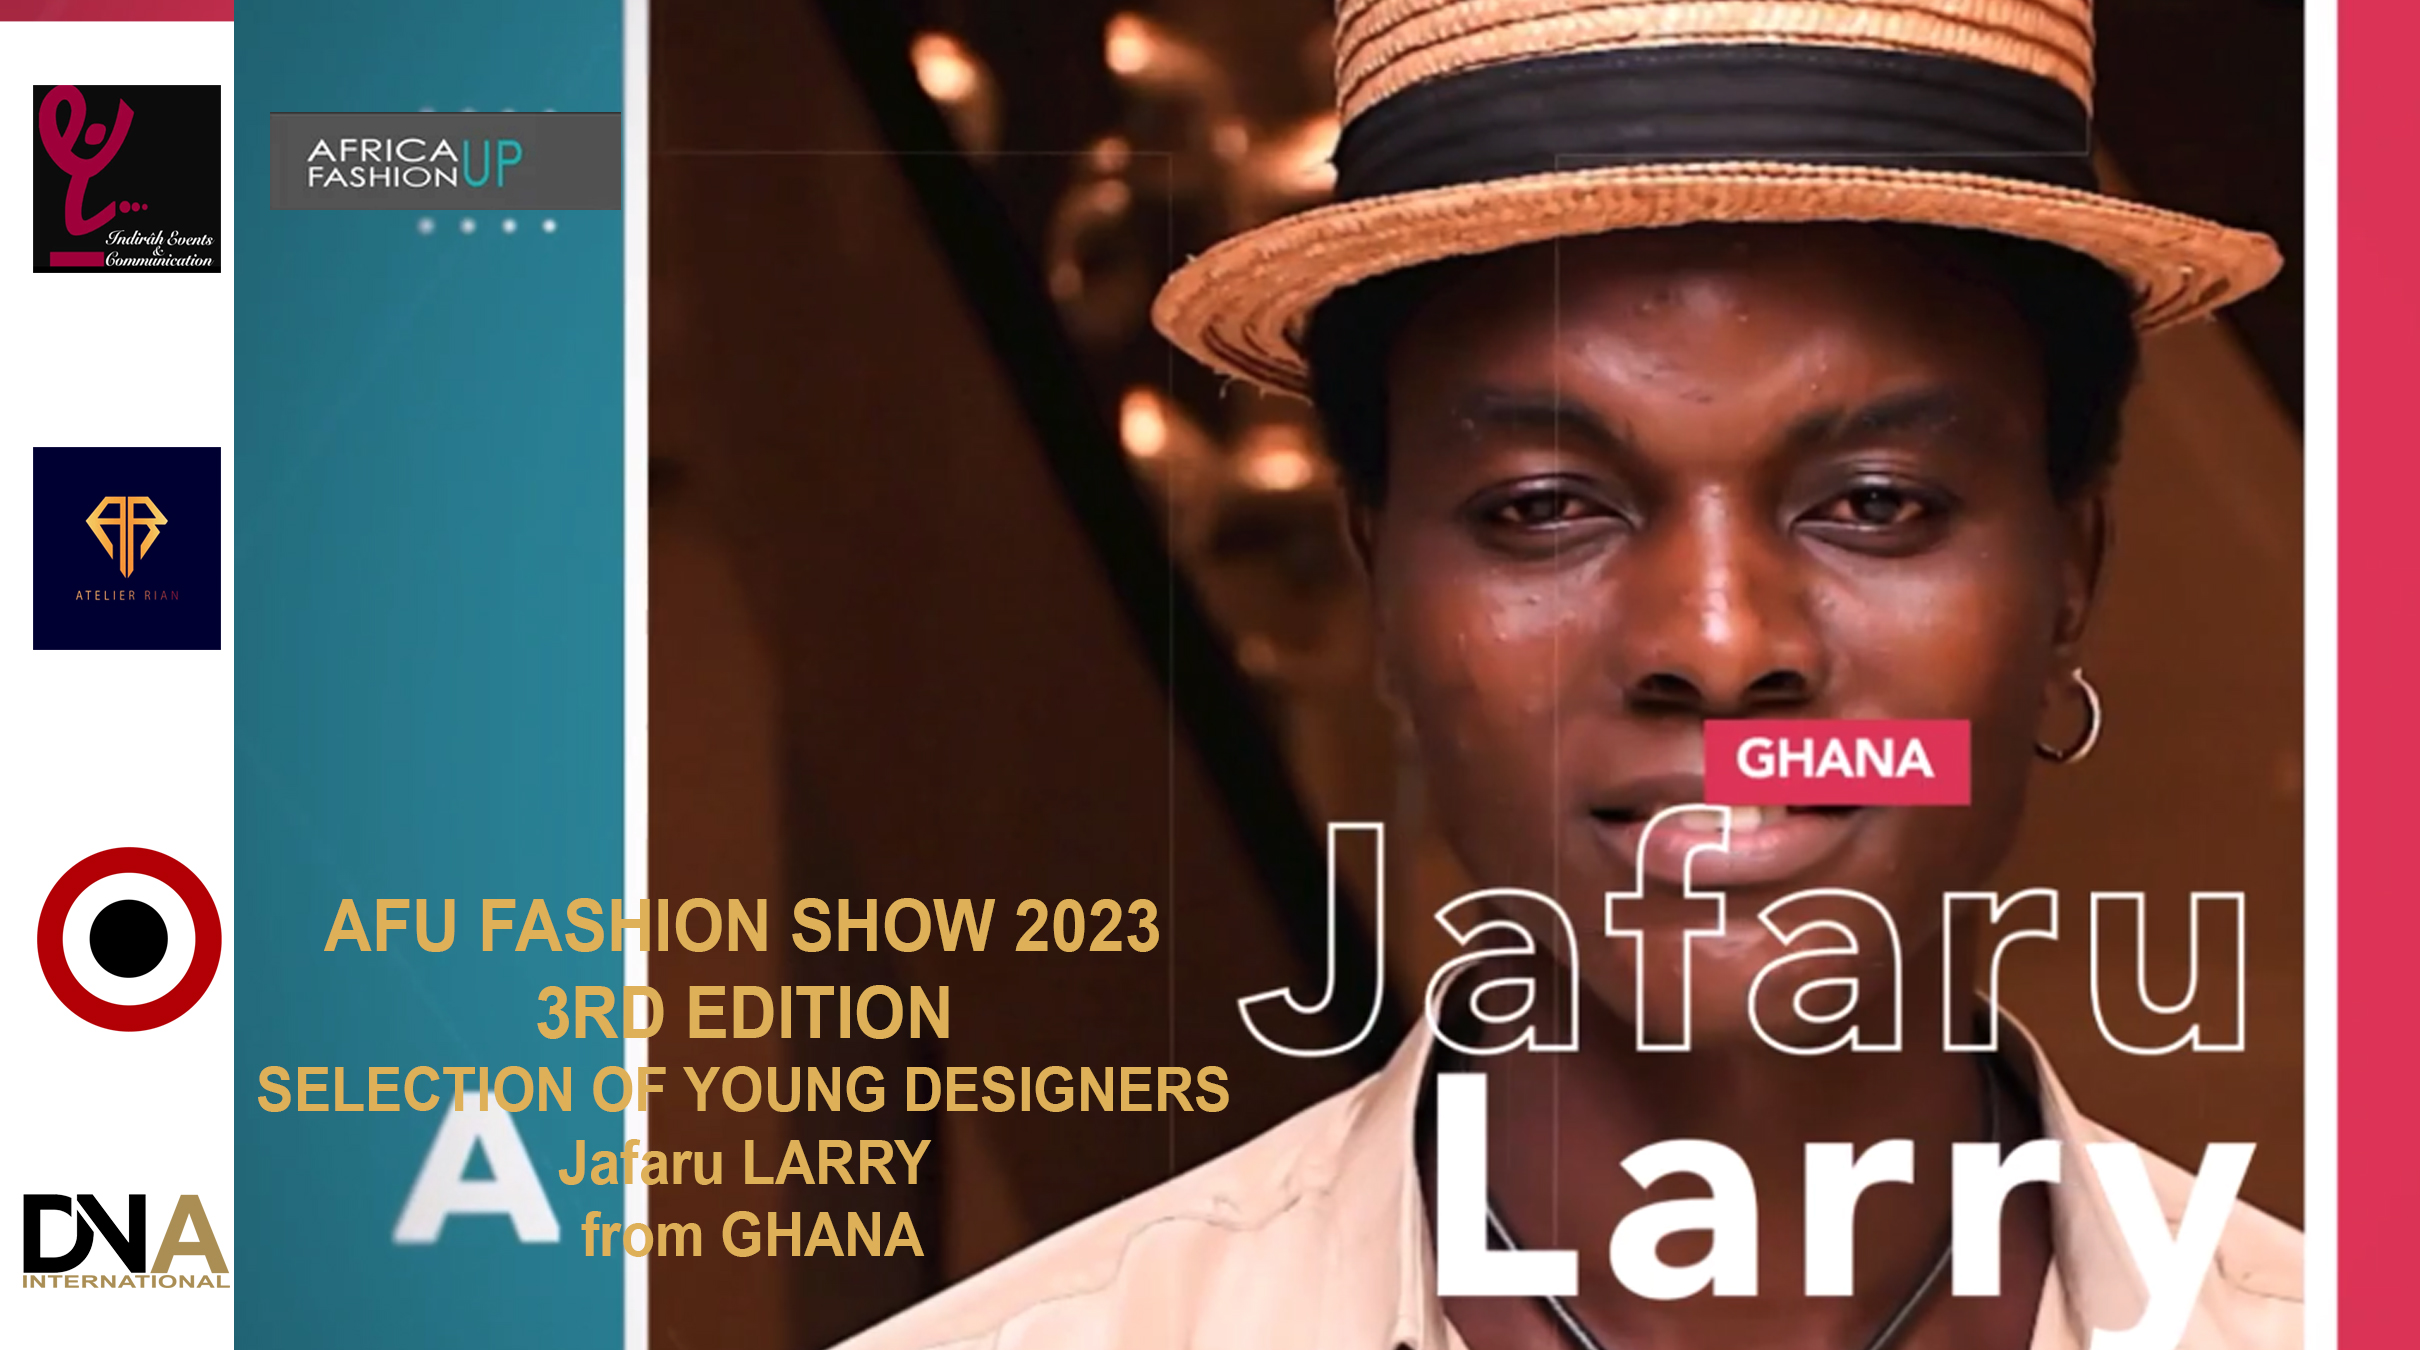 AFRICA-VOGUE-COVER-AFU-FASHION-SHOW-2023-3RD-EDITION-SELECTION-OF-YOUNG-DESIGNERS-JAFARU-LARRY-FROM-GHANA-DN-AFRICA-MEDIA-PARTNER